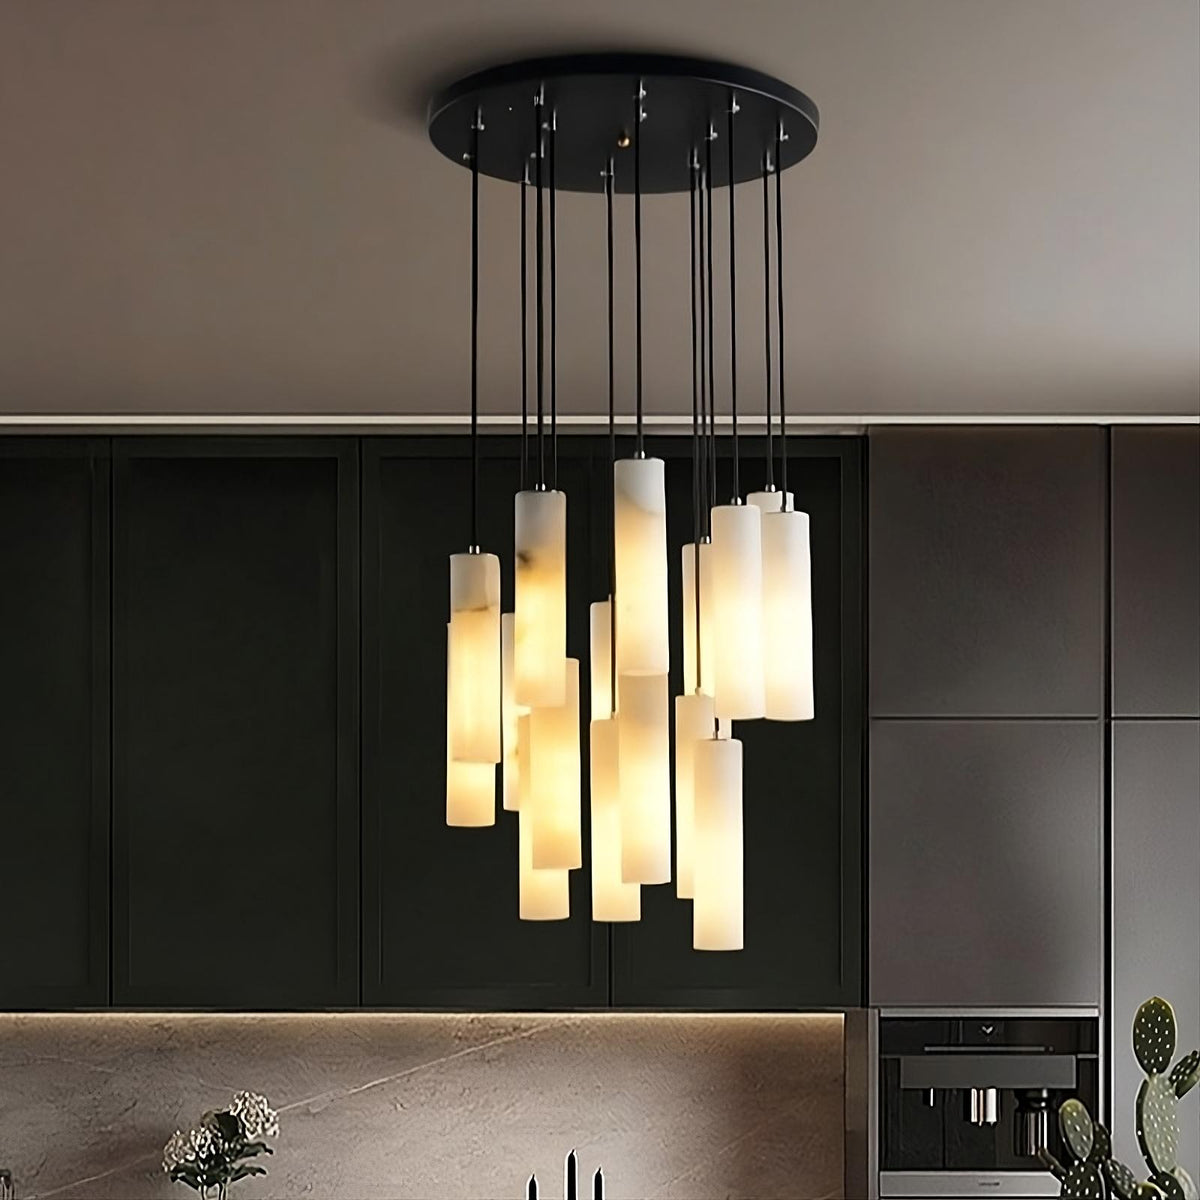 A modern 16-Pendant Marble Light Fixture by Morsale.com with multiple hanging cylindrical lights emits a warm glow. The luxurious lighting is attached to a black circular base on the ceiling of a sleek, contemporary kitchen featuring dark cabinets and built-in appliances, with some plants visible.